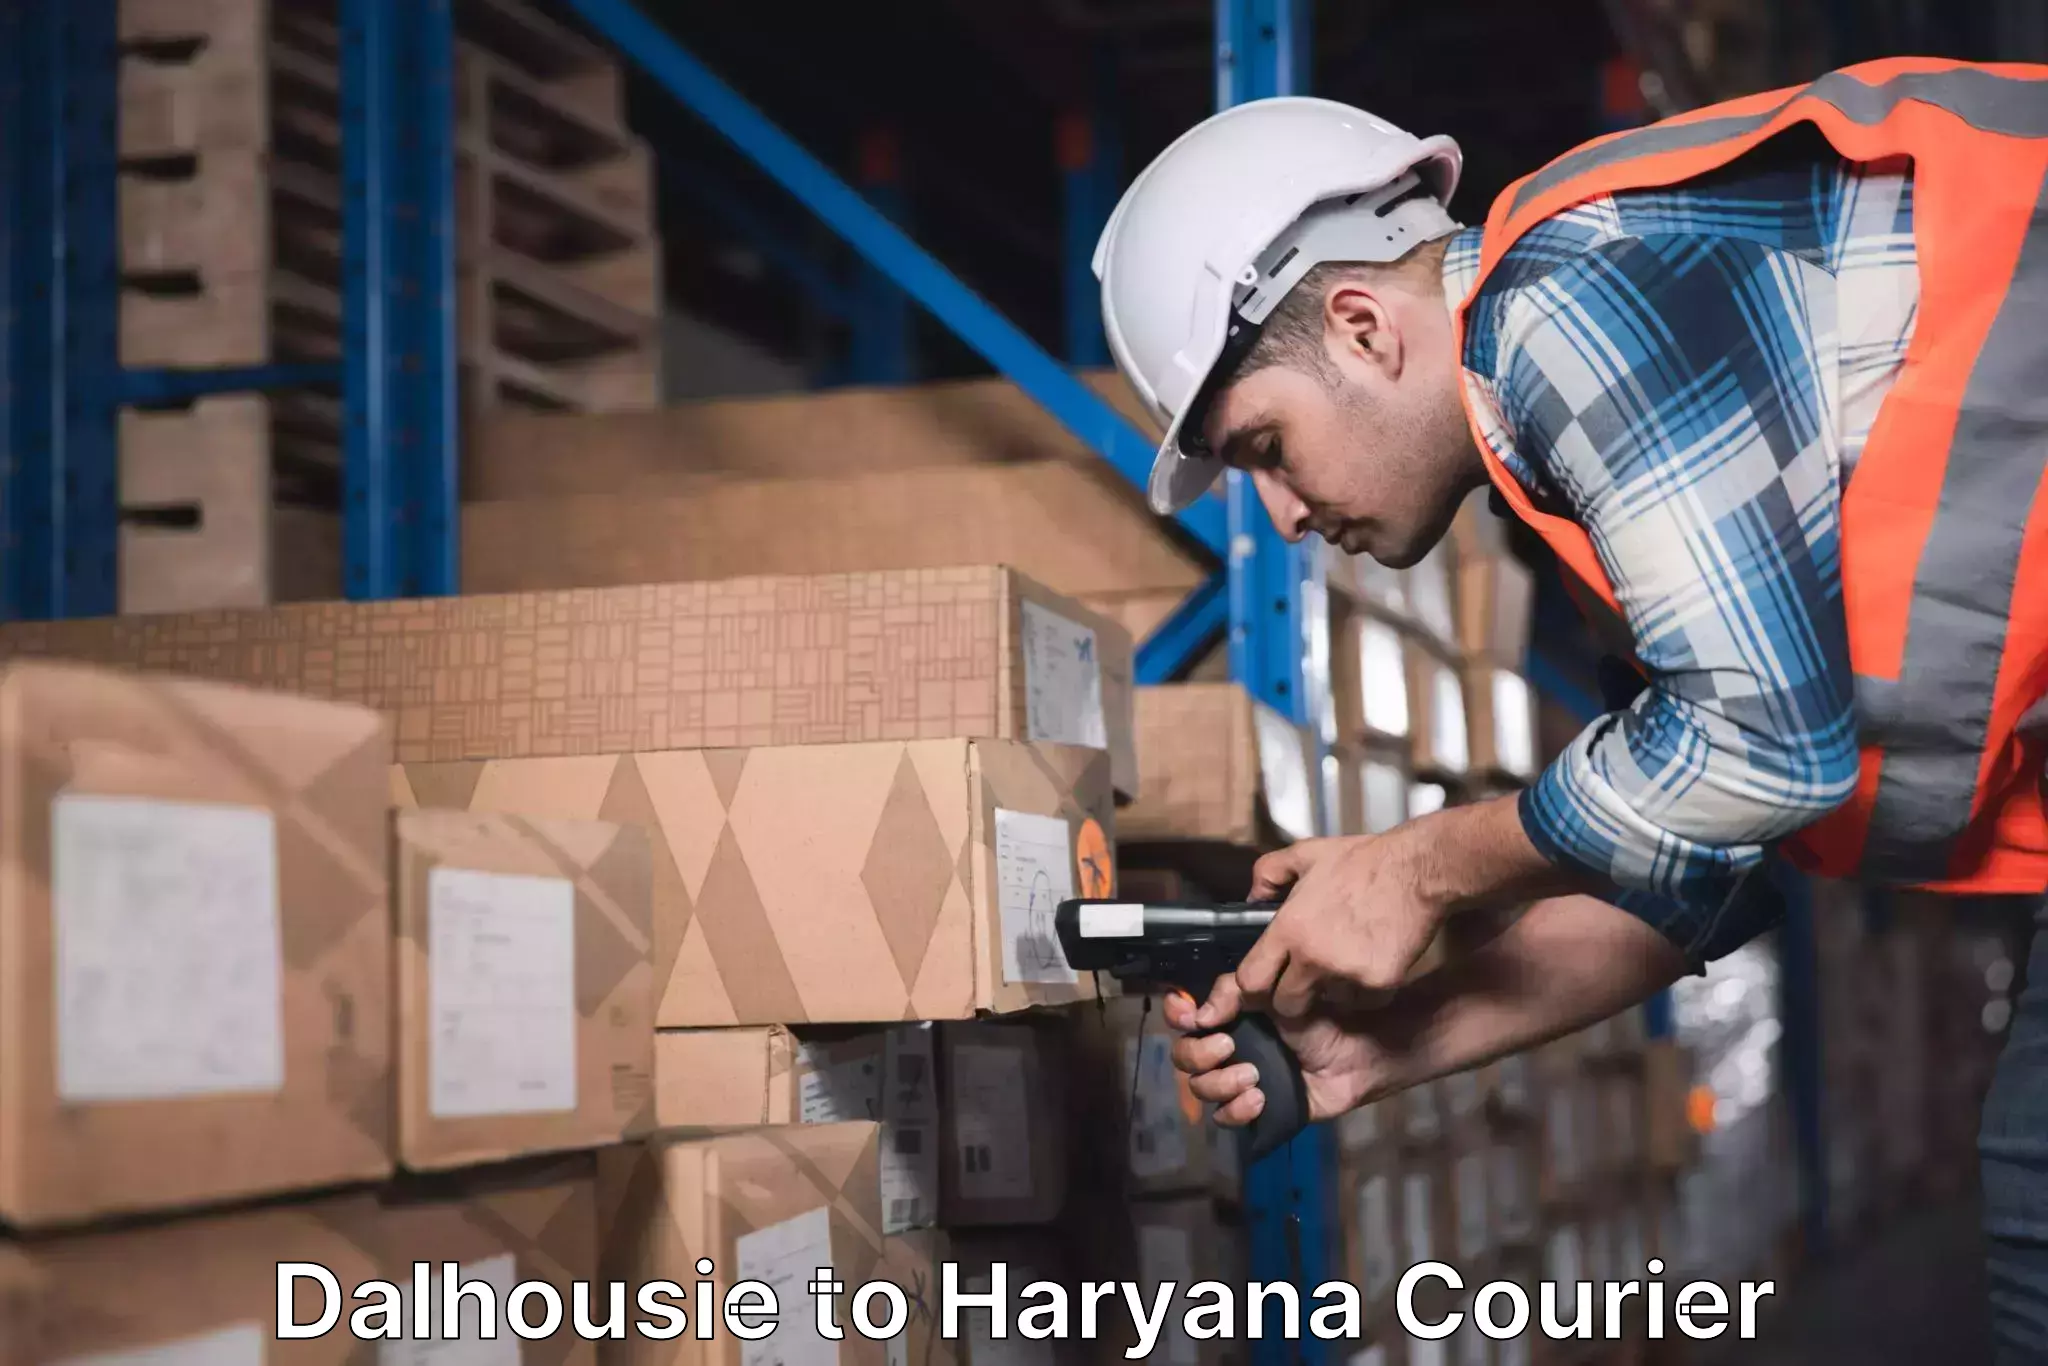 Global shipping networks Dalhousie to NCR Haryana